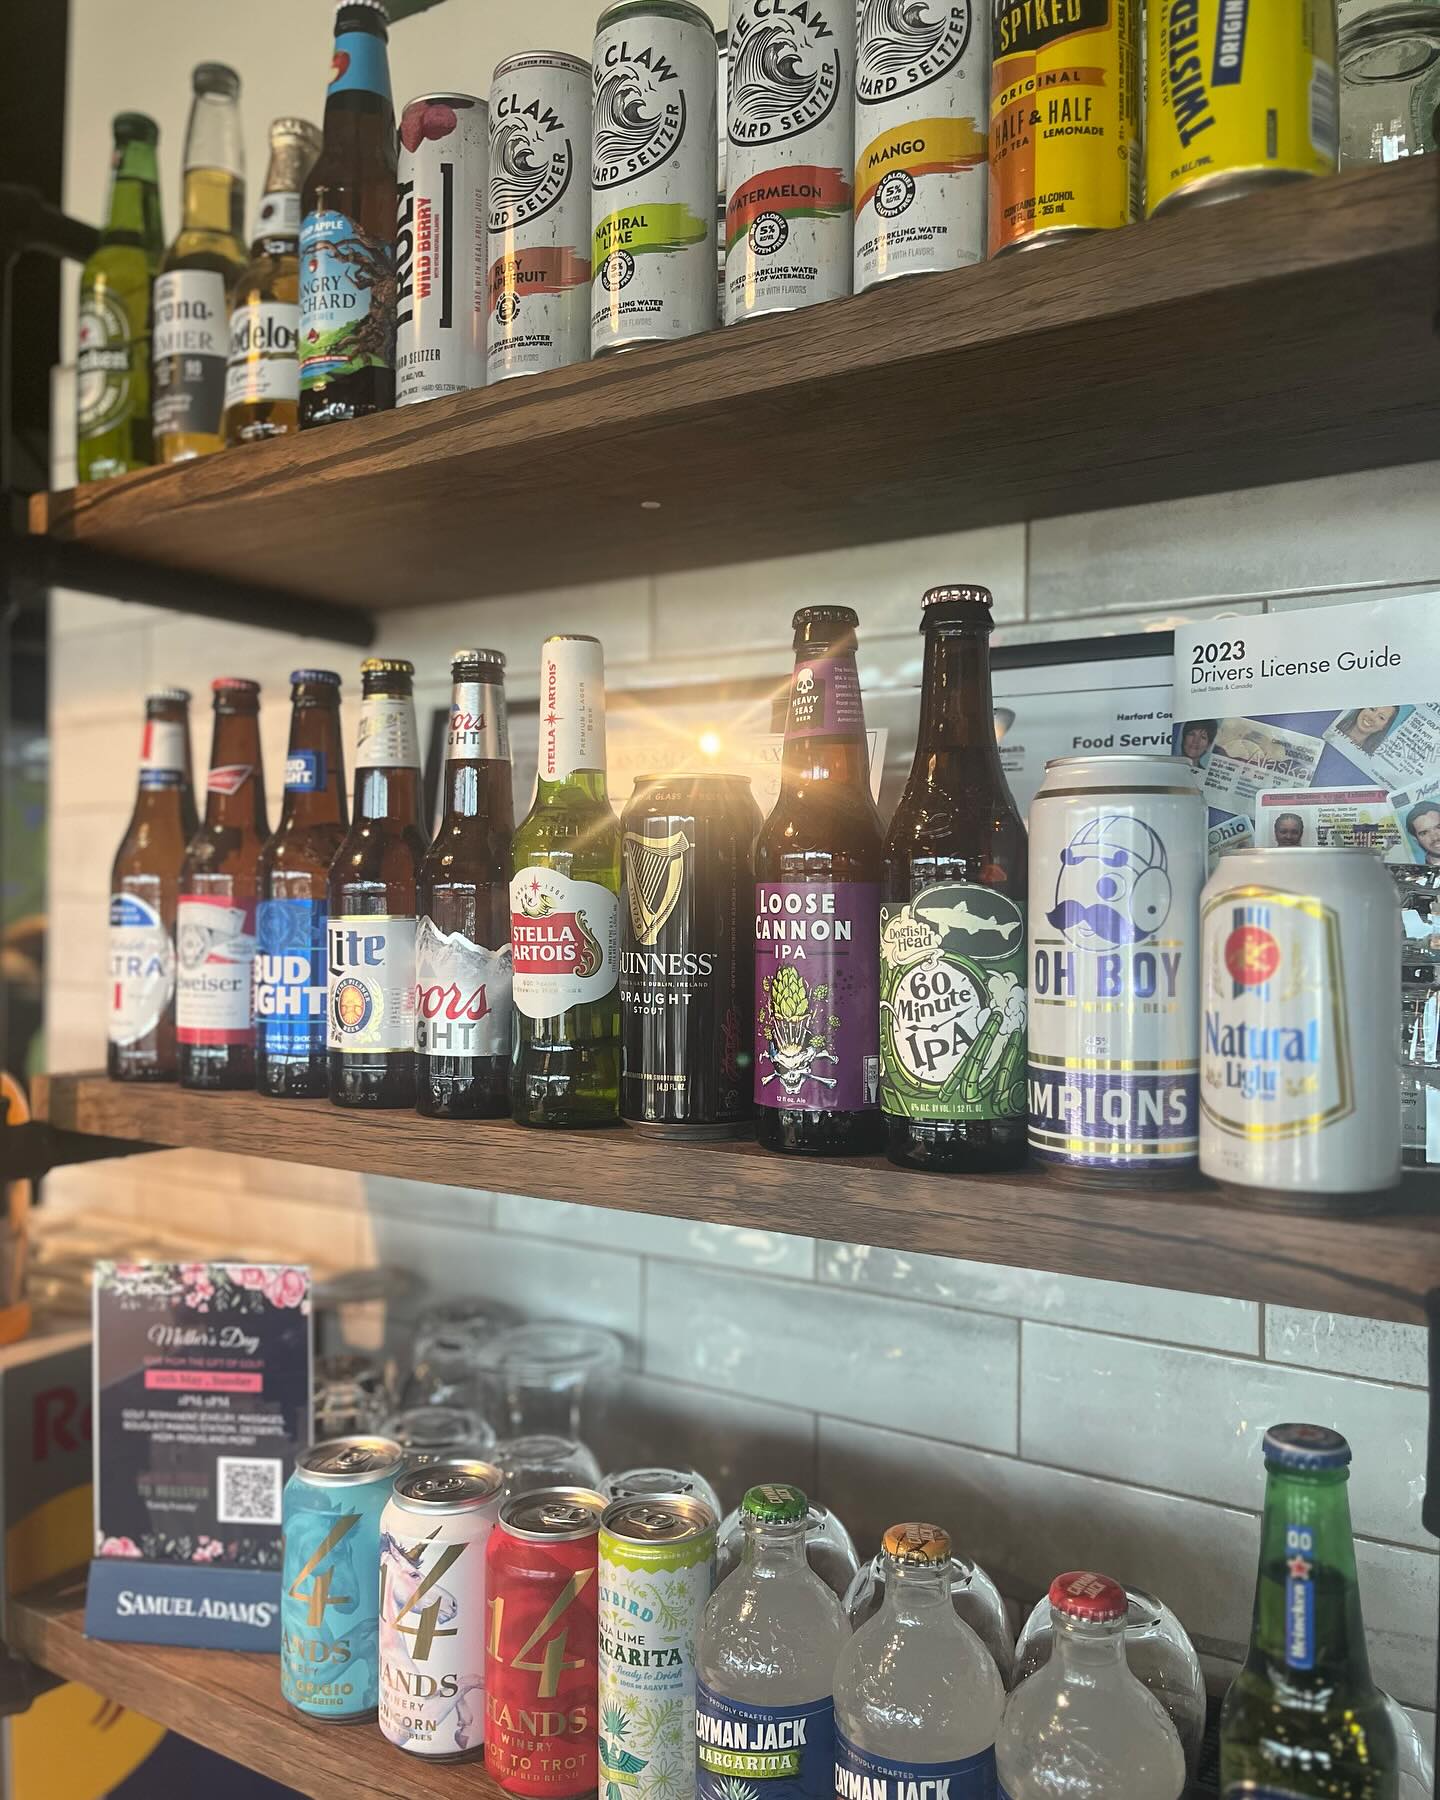 shelves with cans and bottles of beer, hard seltzer, and other drinks